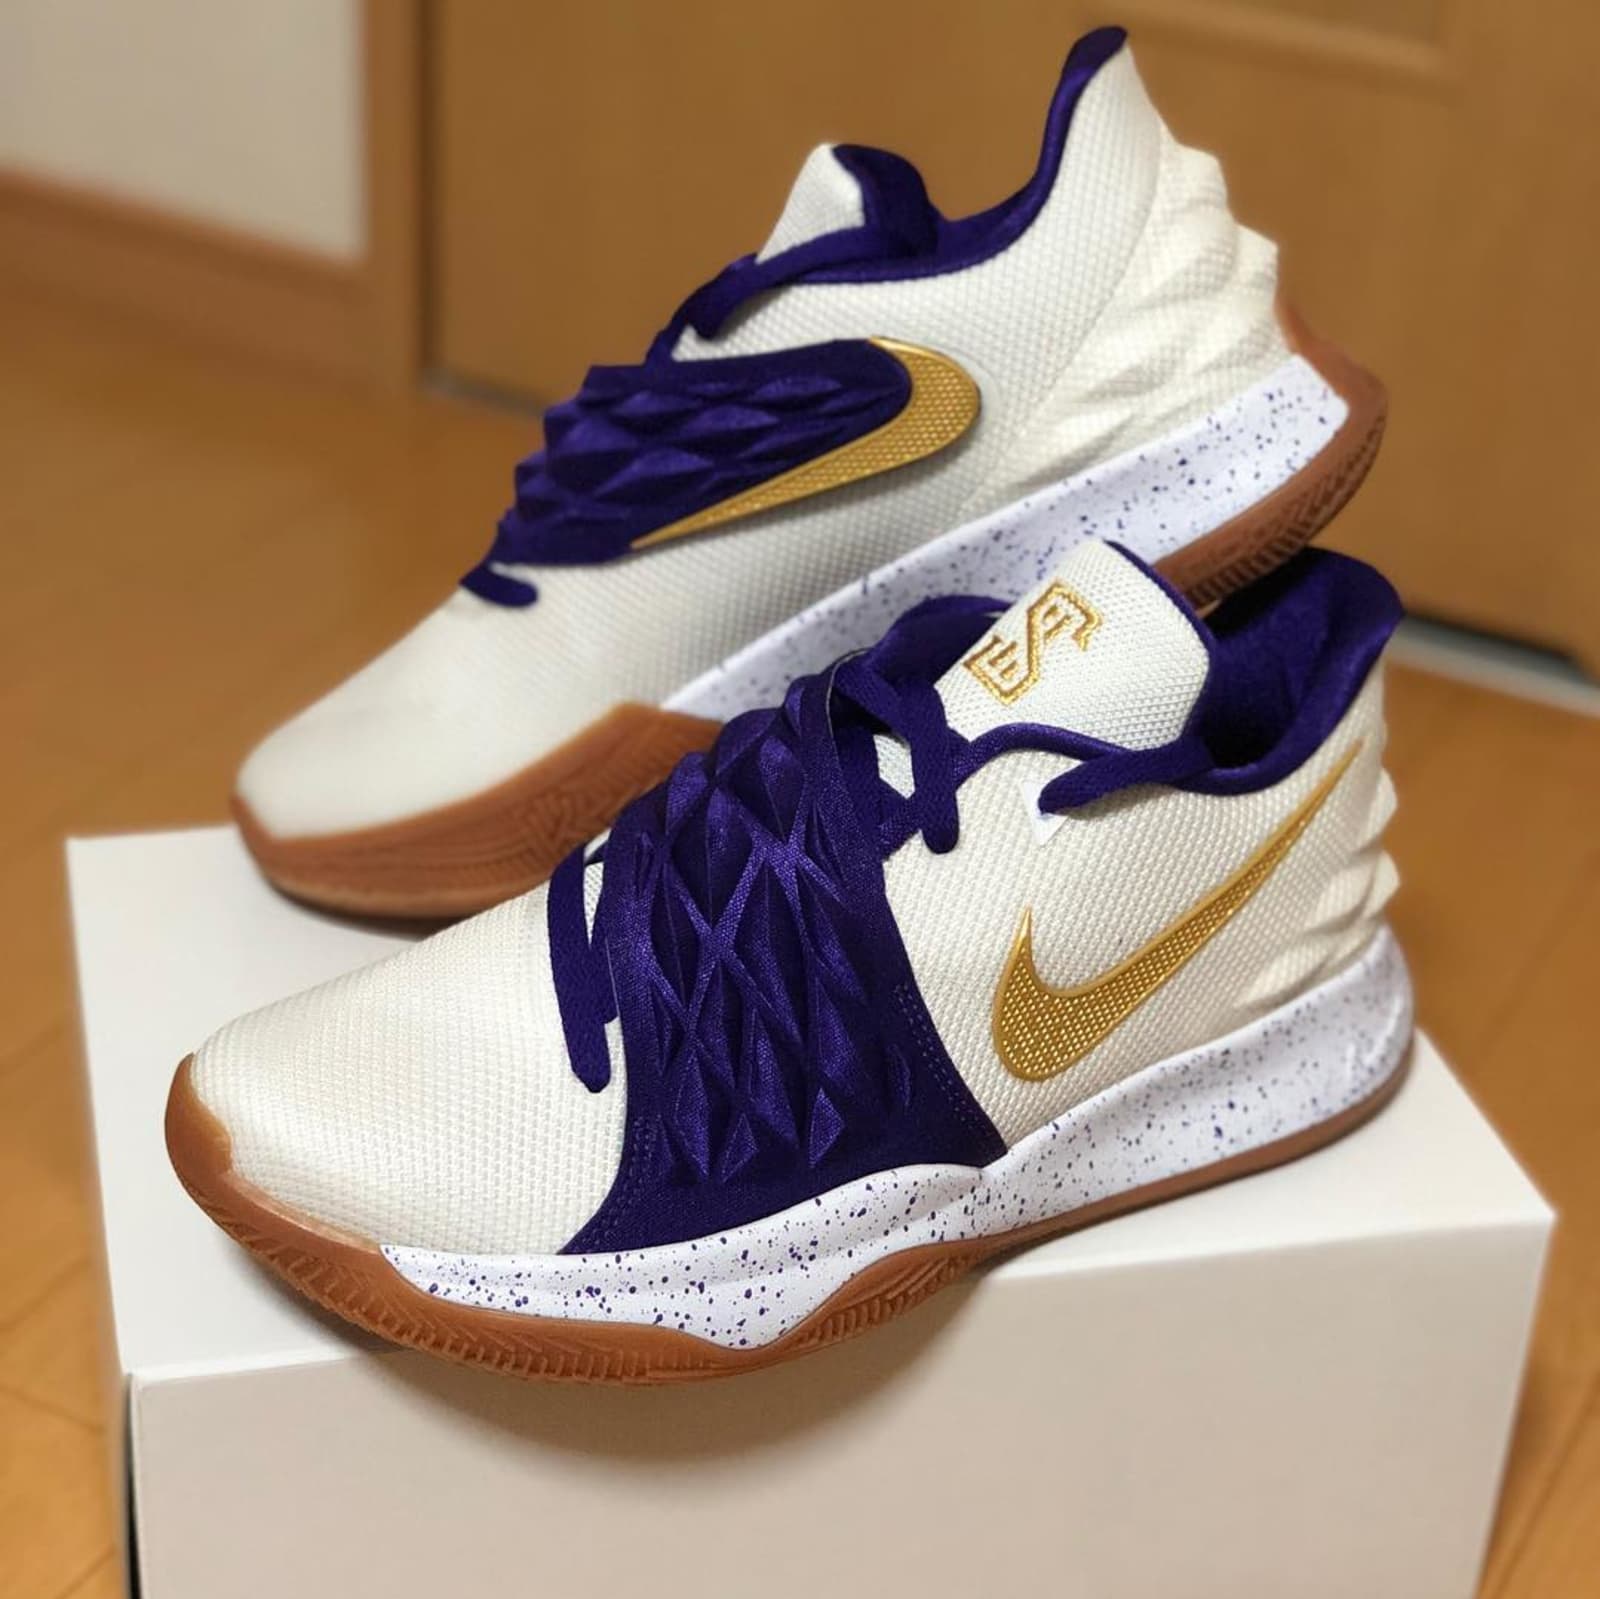 kyrie low id white